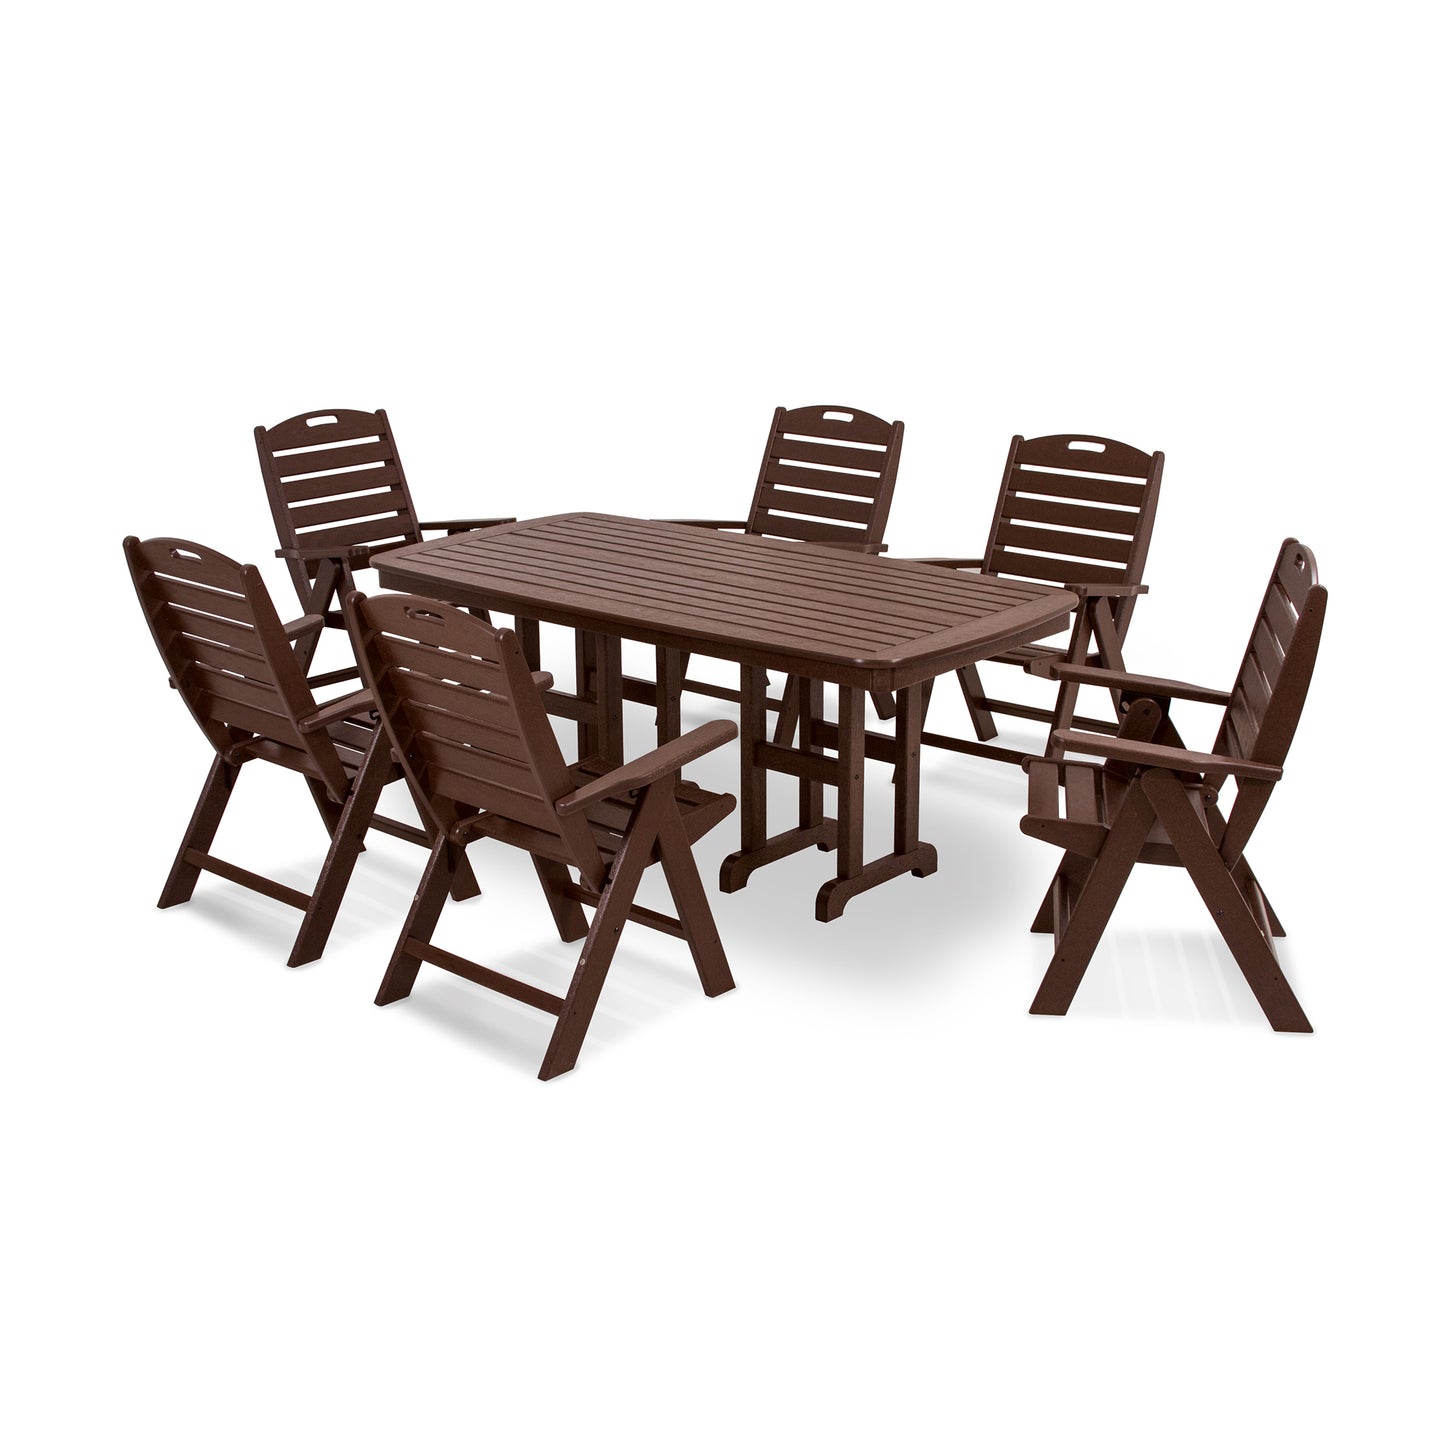 A dark brown POLYWOOD® Nautical 7-Piece Dining Set consisting of a rectangular table and six chairs with vertical slat backs, arranged on a white background.